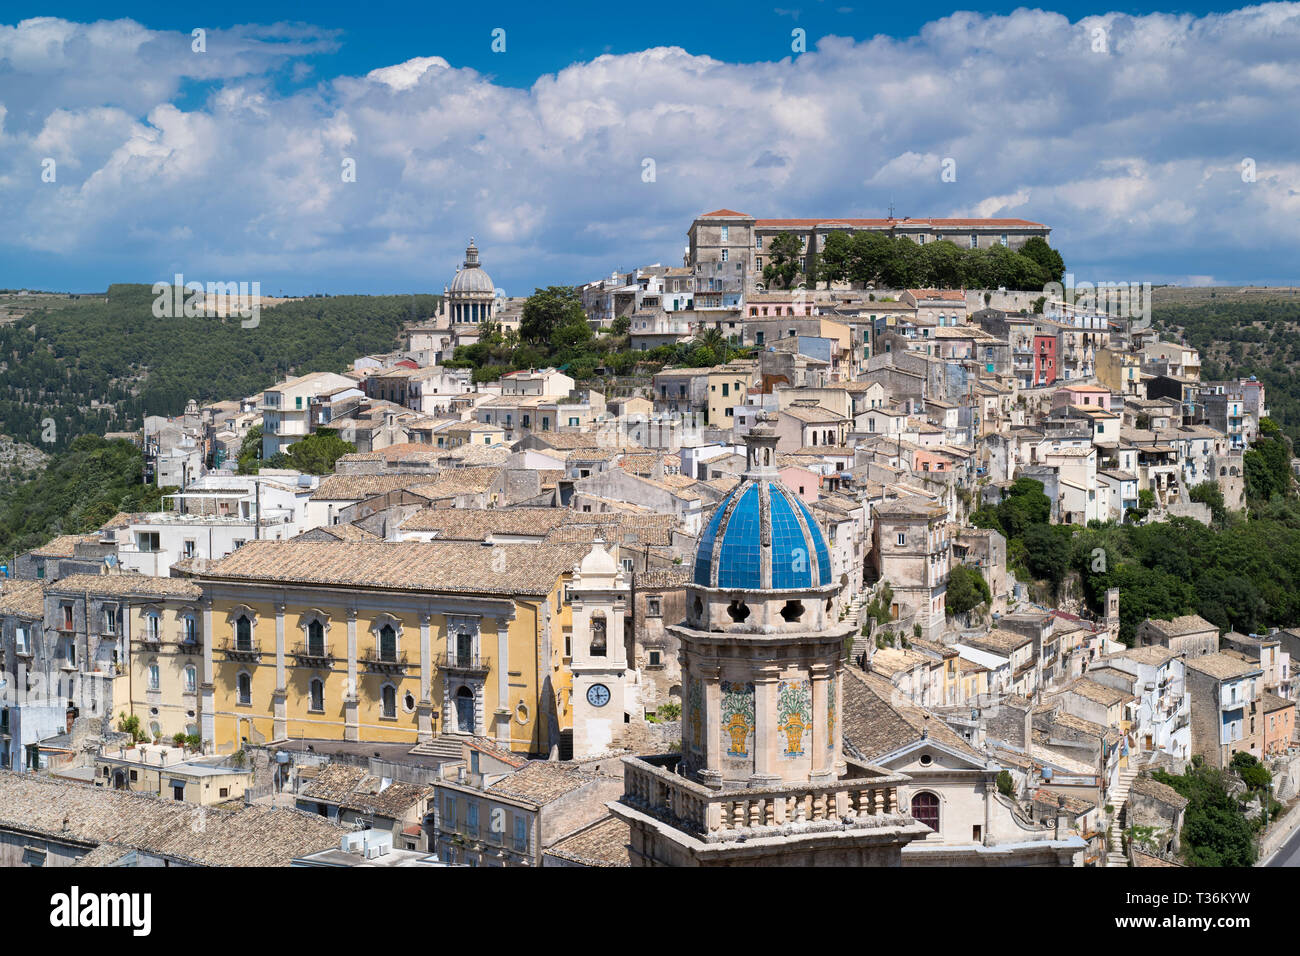 Aerial view of Ragusa Ibla famous hill town with Santa Maria delli'Idria a Baroque style church in foreground, Sicily Stock Photo